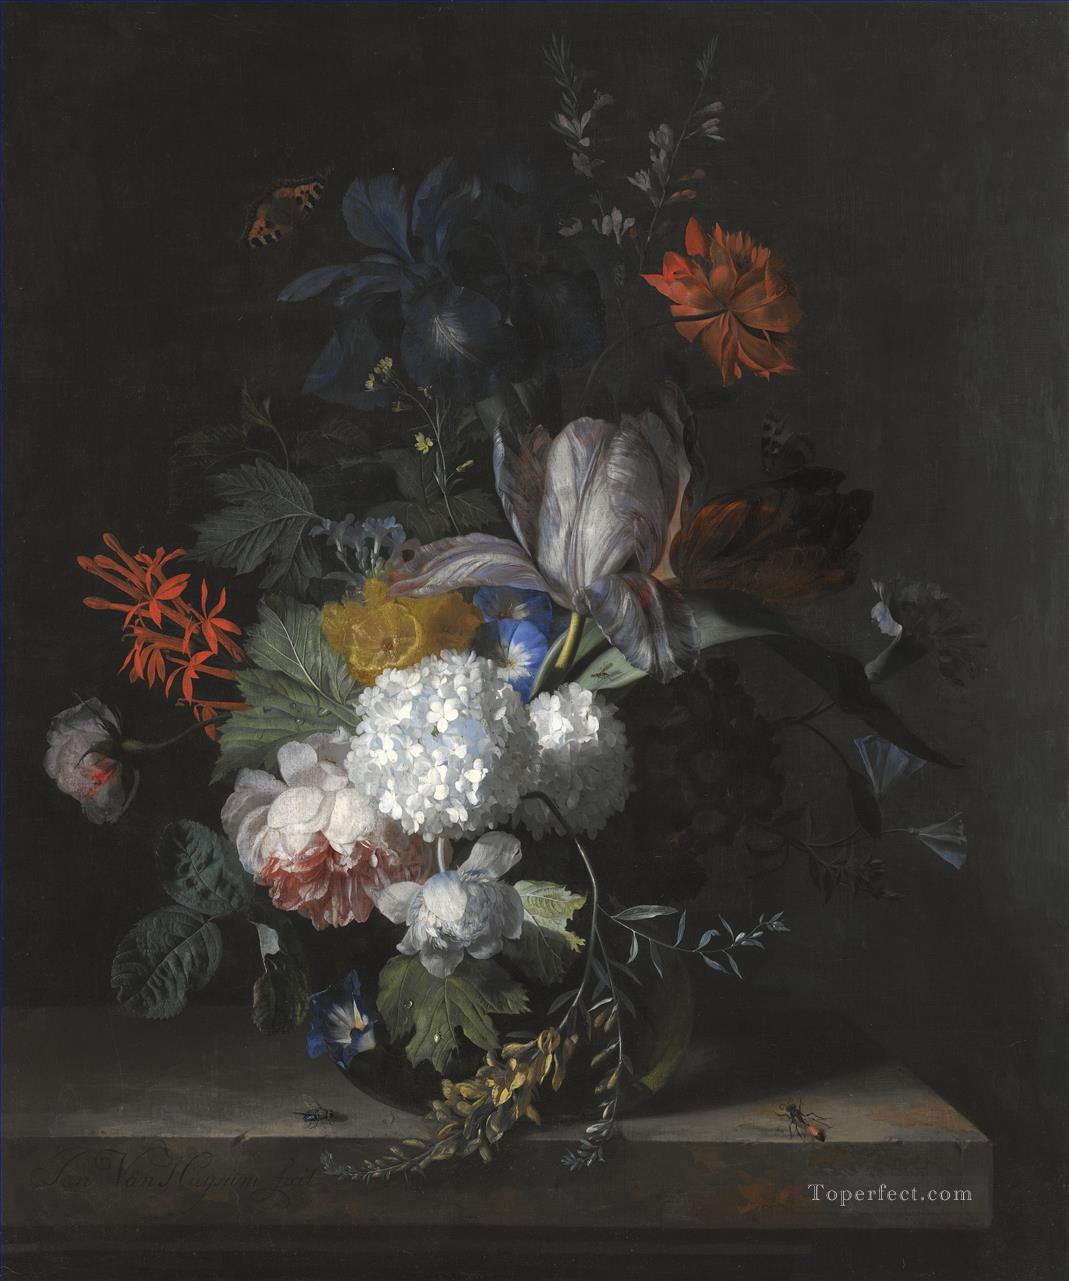 A STILL LIFE WITH HYDRANGEA CONVOLVULUS POLYANTHUS PEONIES AURICULA CARNATION TULIPS SNOWBALLS AND OTHER FLOWERS IN A GLASS VASE Jan van Huysum Oil Paintings